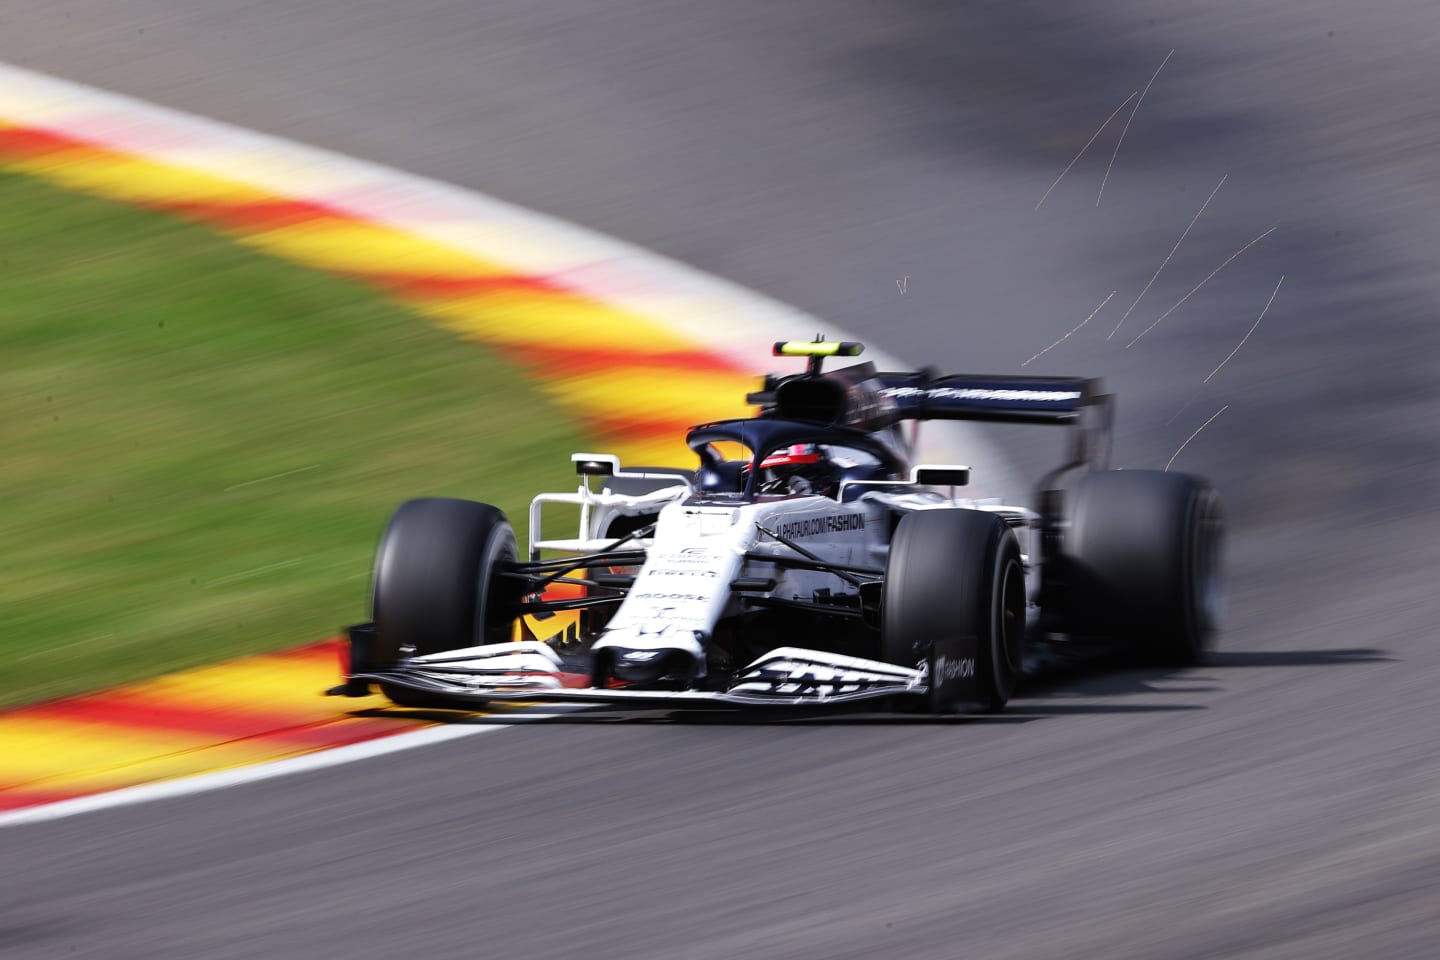 SPA, BELGIUM - AUGUST 30: Pierre Gasly of France driving the (10) Scuderia AlphaTauri AT01 Honda on track during the F1 Grand Prix of Belgium at Circuit de Spa-Francorchamps on August 30, 2020 in Spa, Belgium. (Photo by Lars Baron/Getty Images)